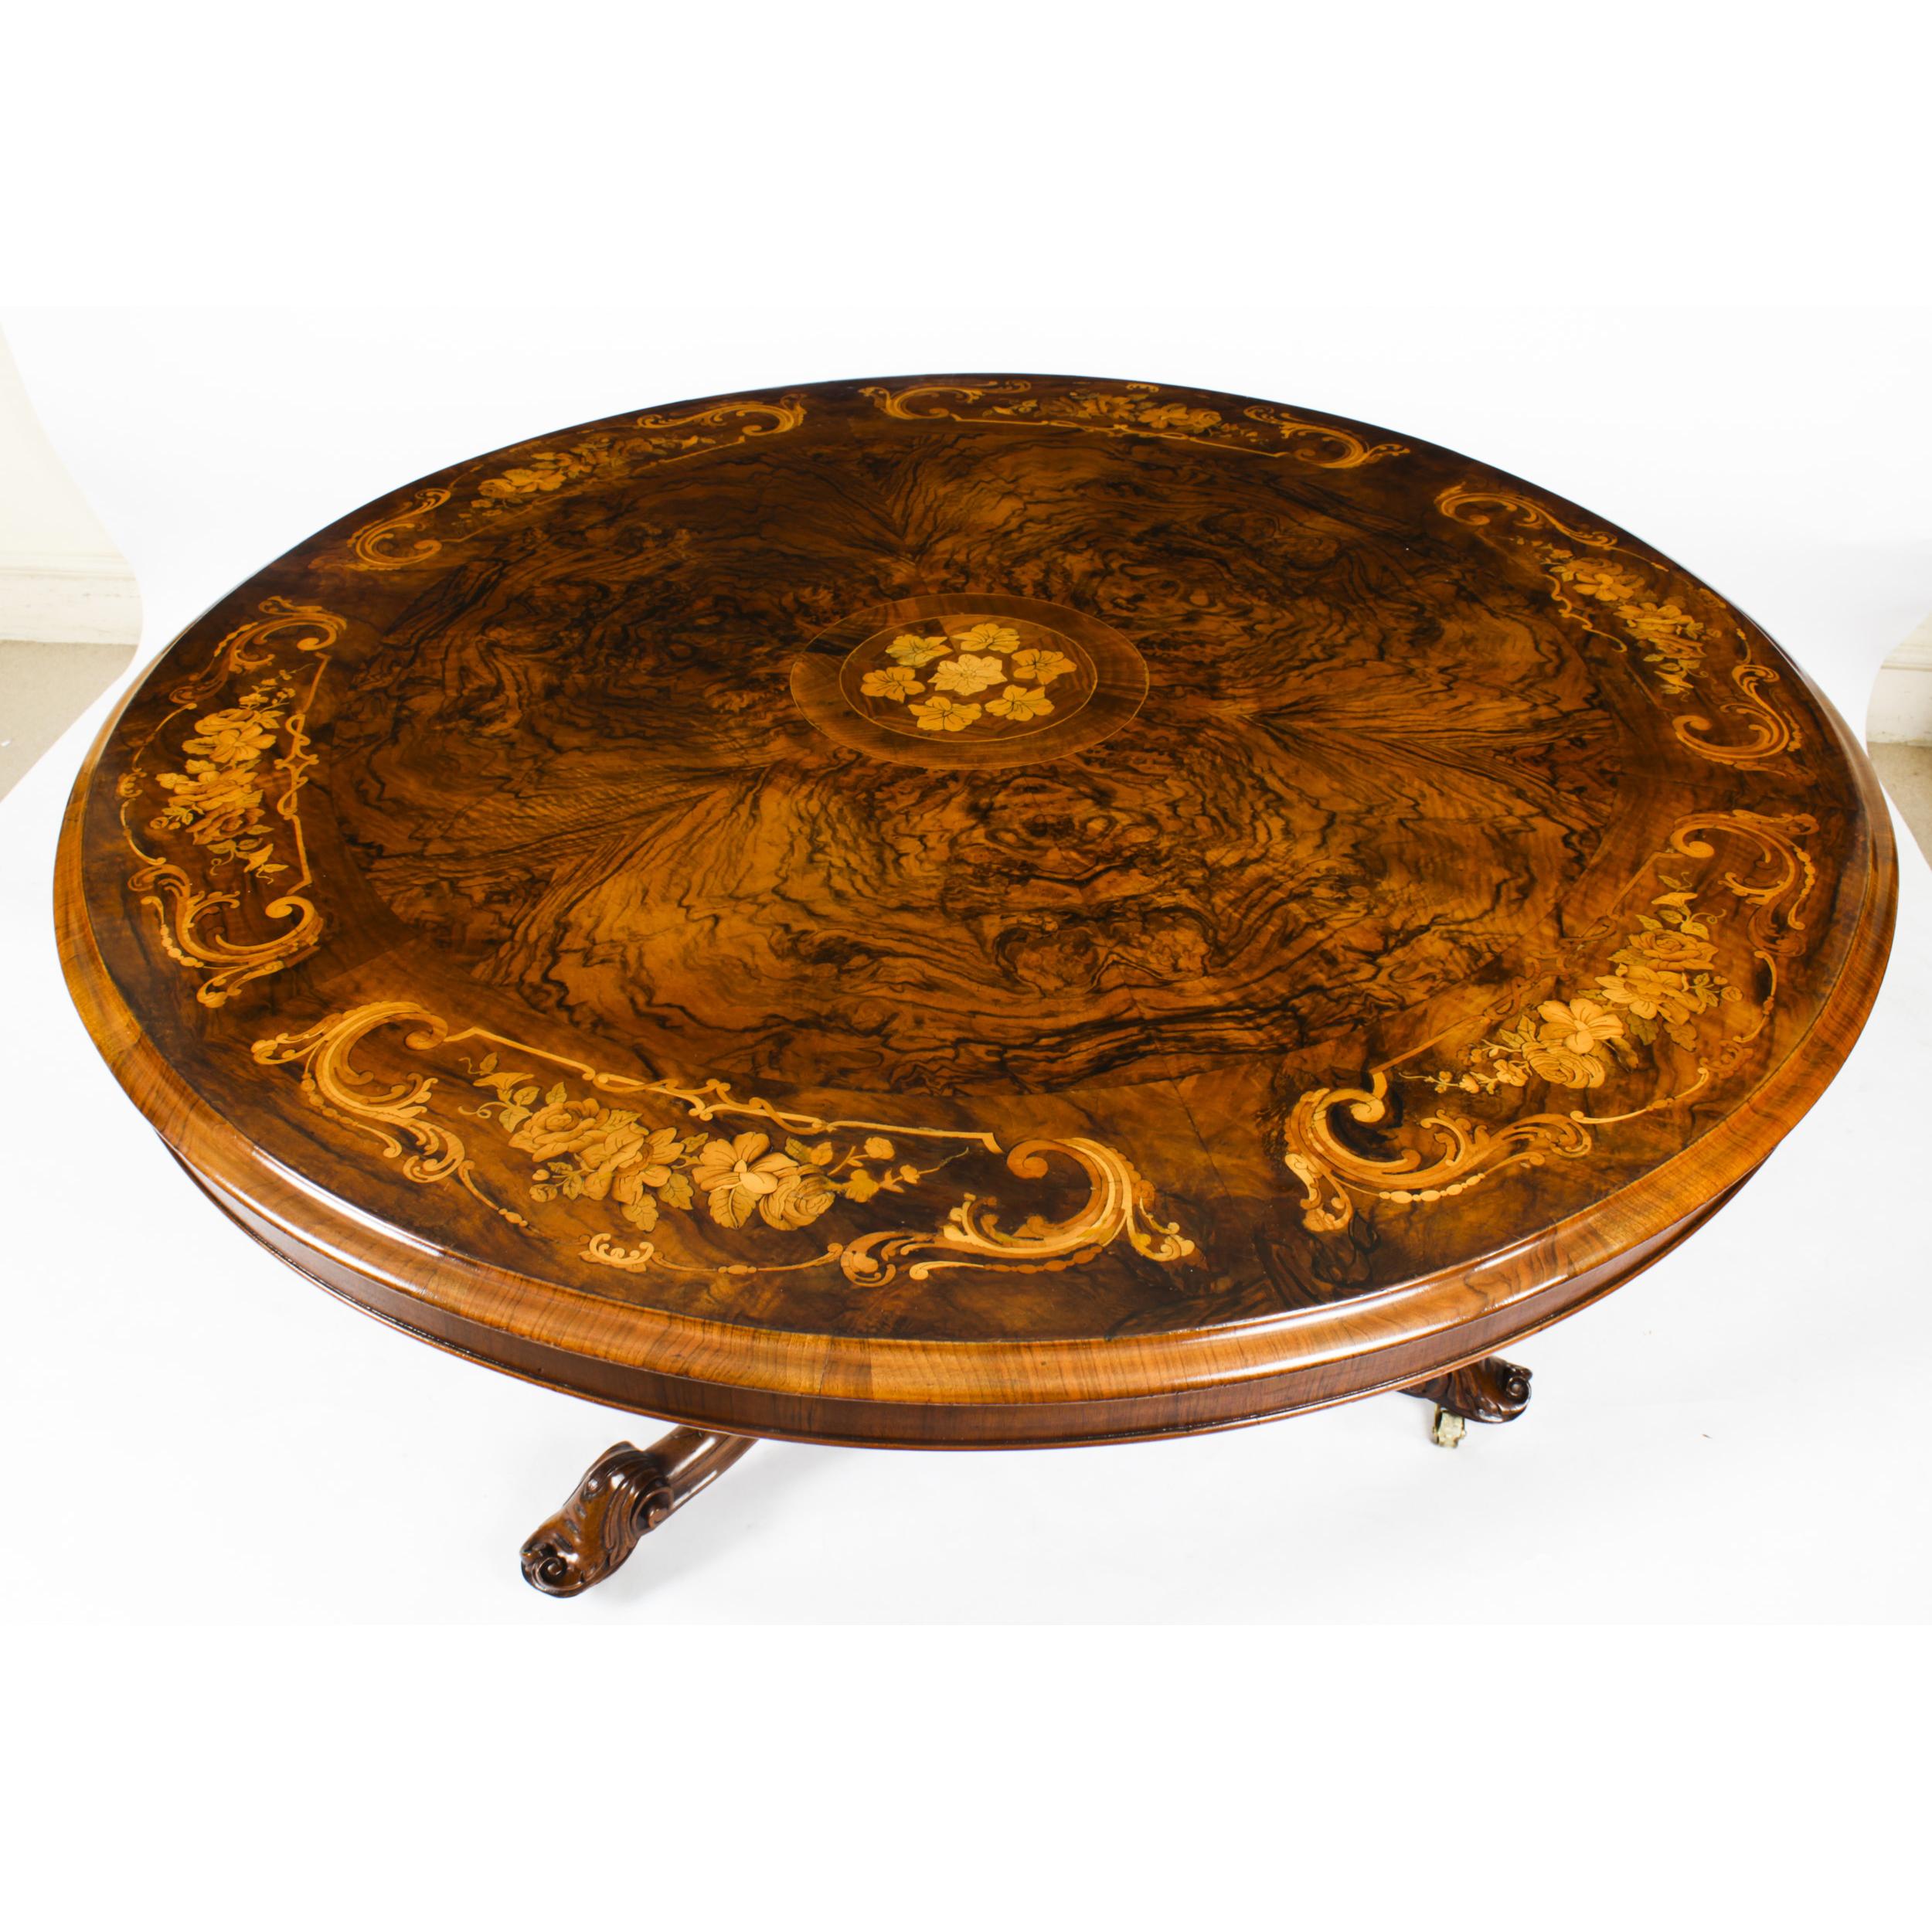 English Antique Round Burr Walnut Marquetry Loo Table 19th C & 6 Vintage Chairs